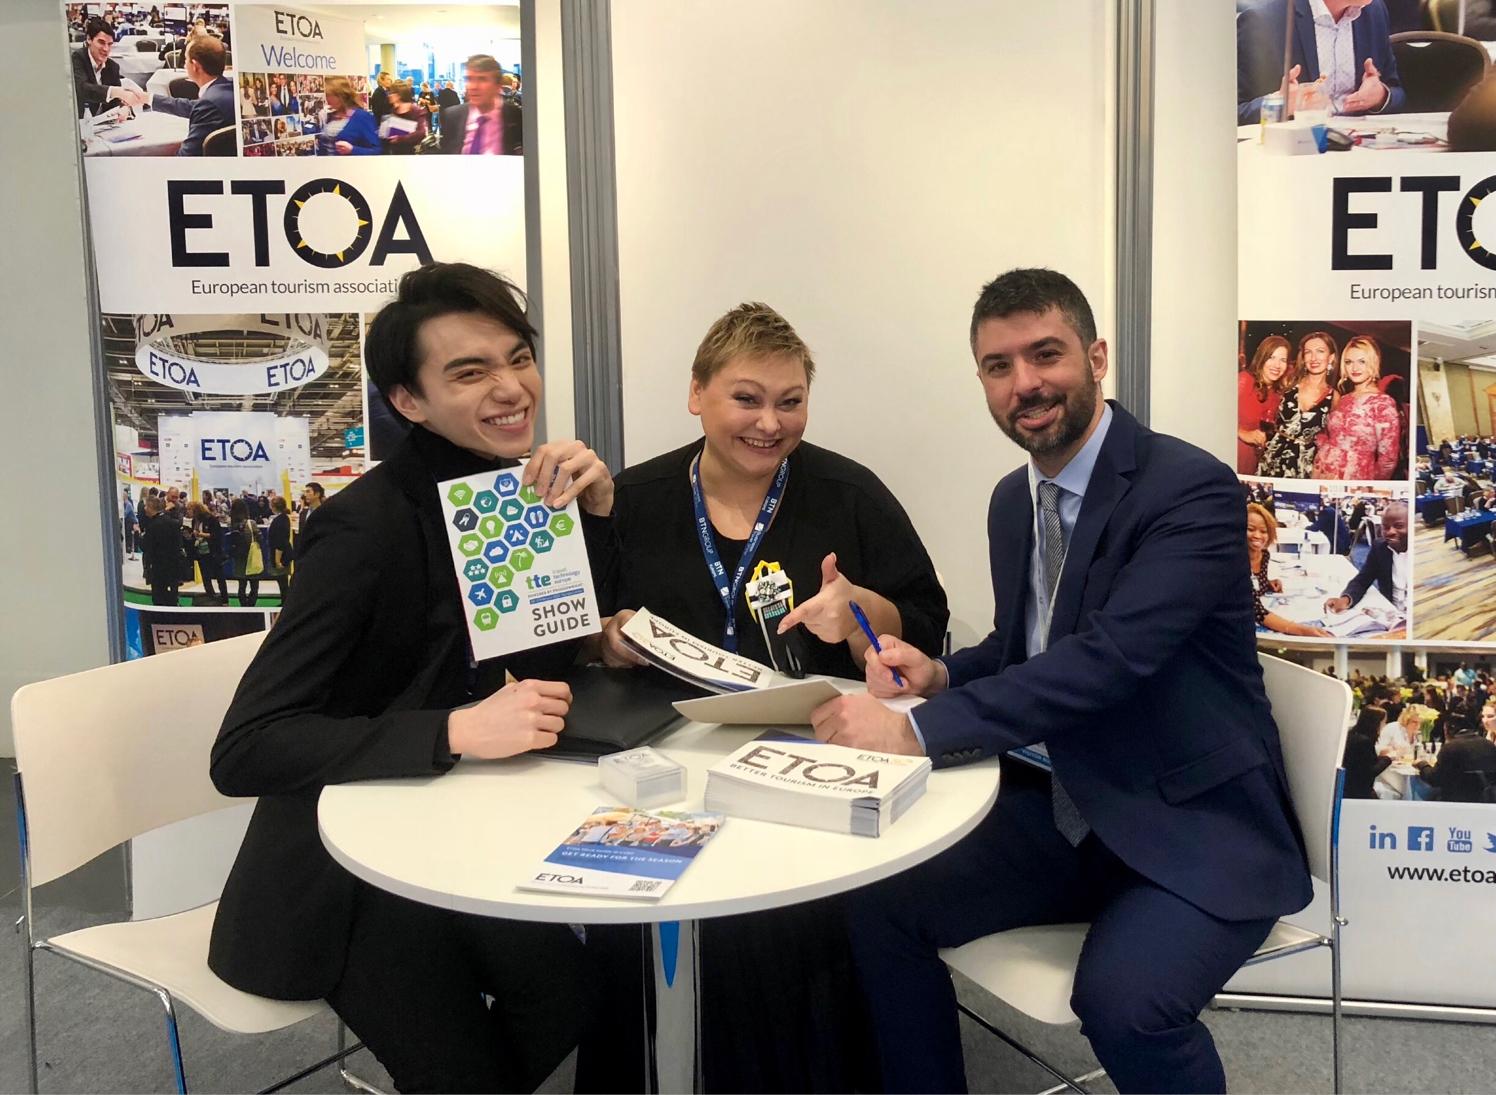 Peace working with the ETOA team at Excel, London | International Student Abroad